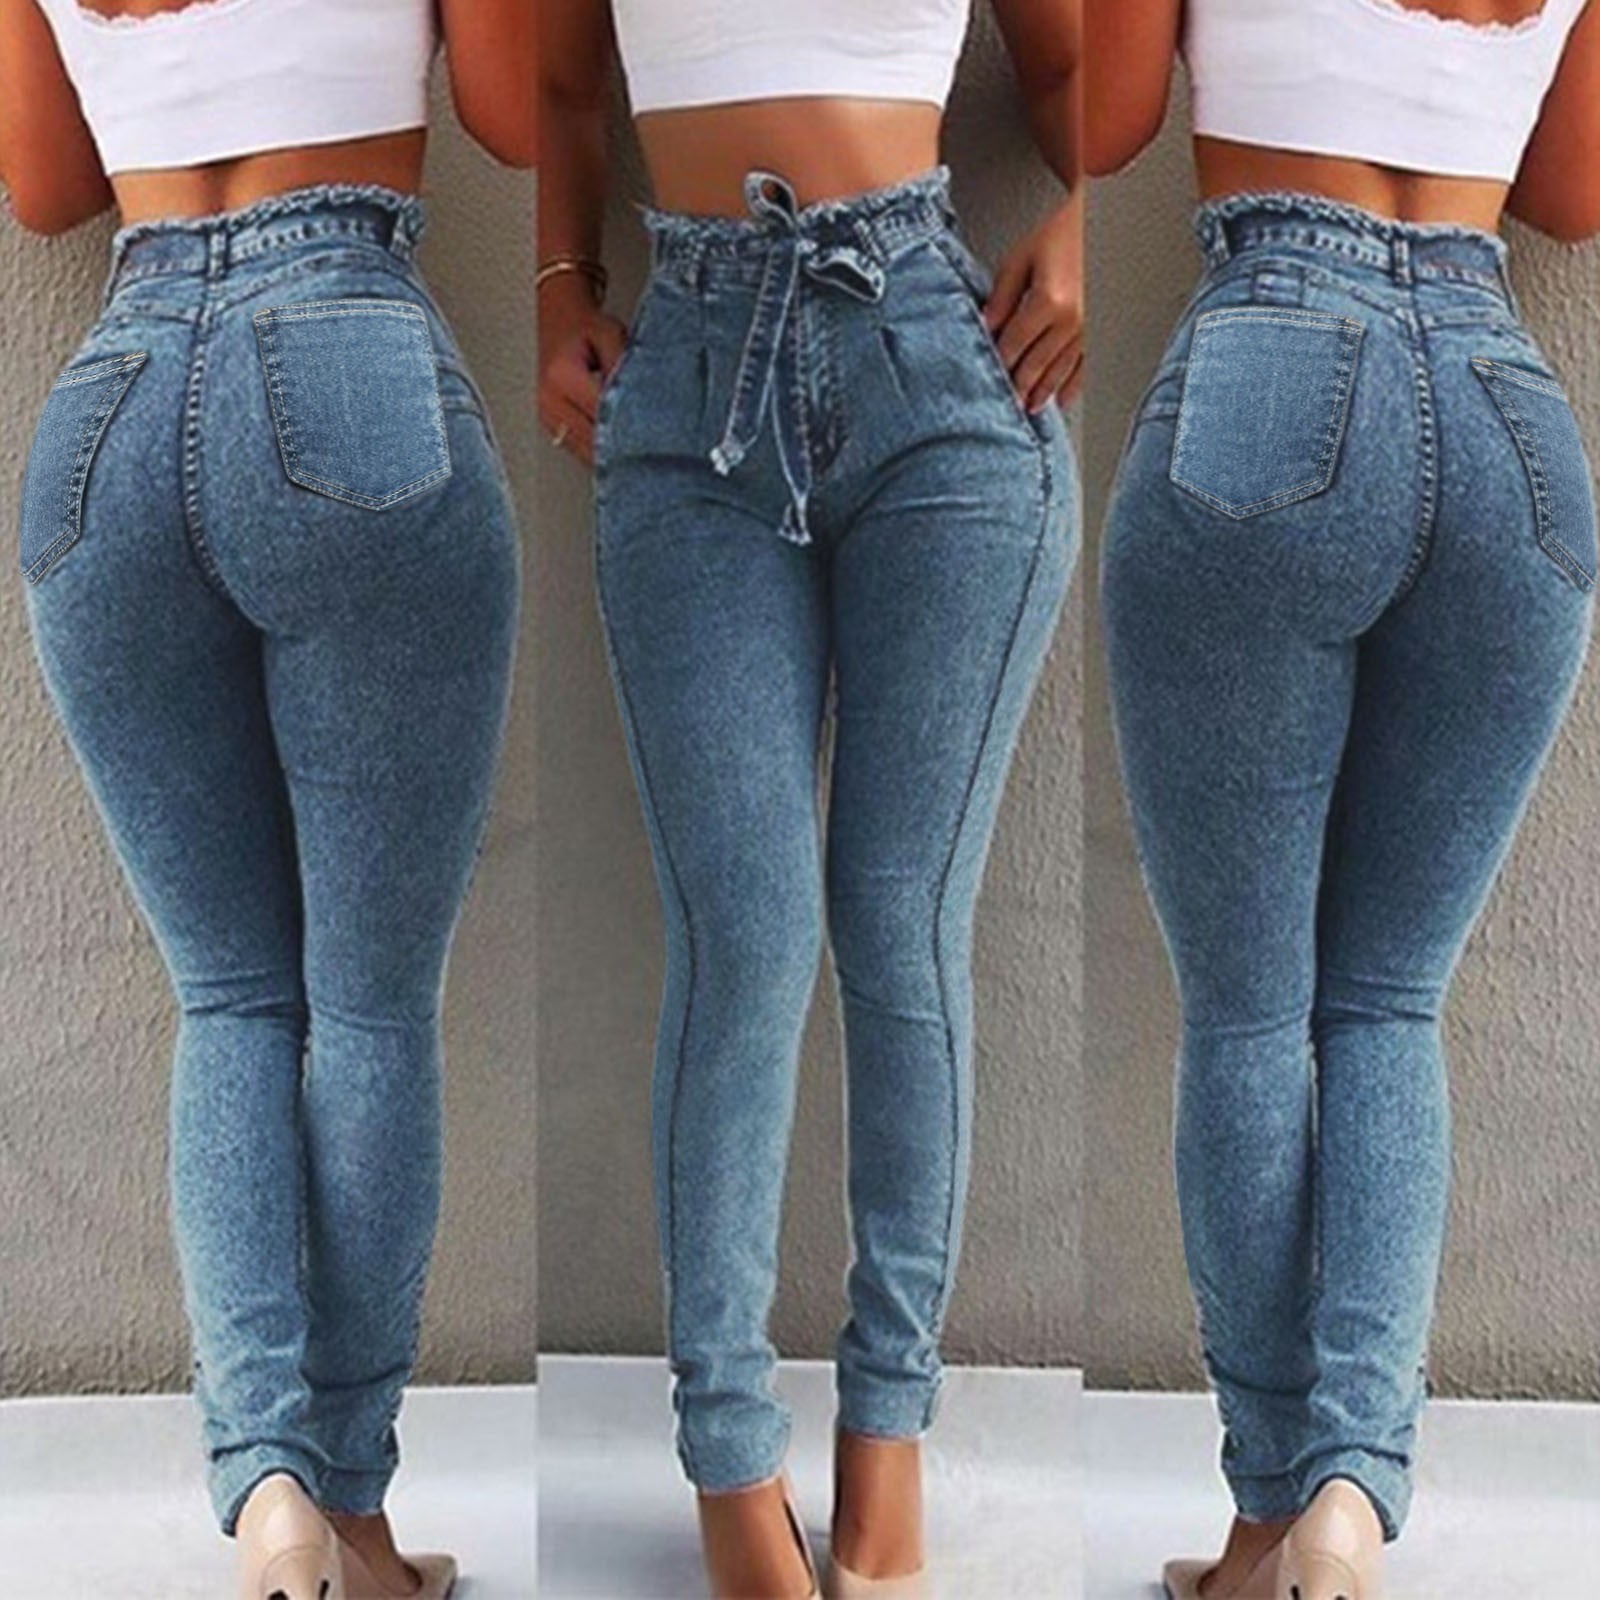 Jeans for Women Women's Casual High-Waist Lace-Up Denim Trousers Slim  Stretch Jeans Trousers Womens Jeans Light blue XL 